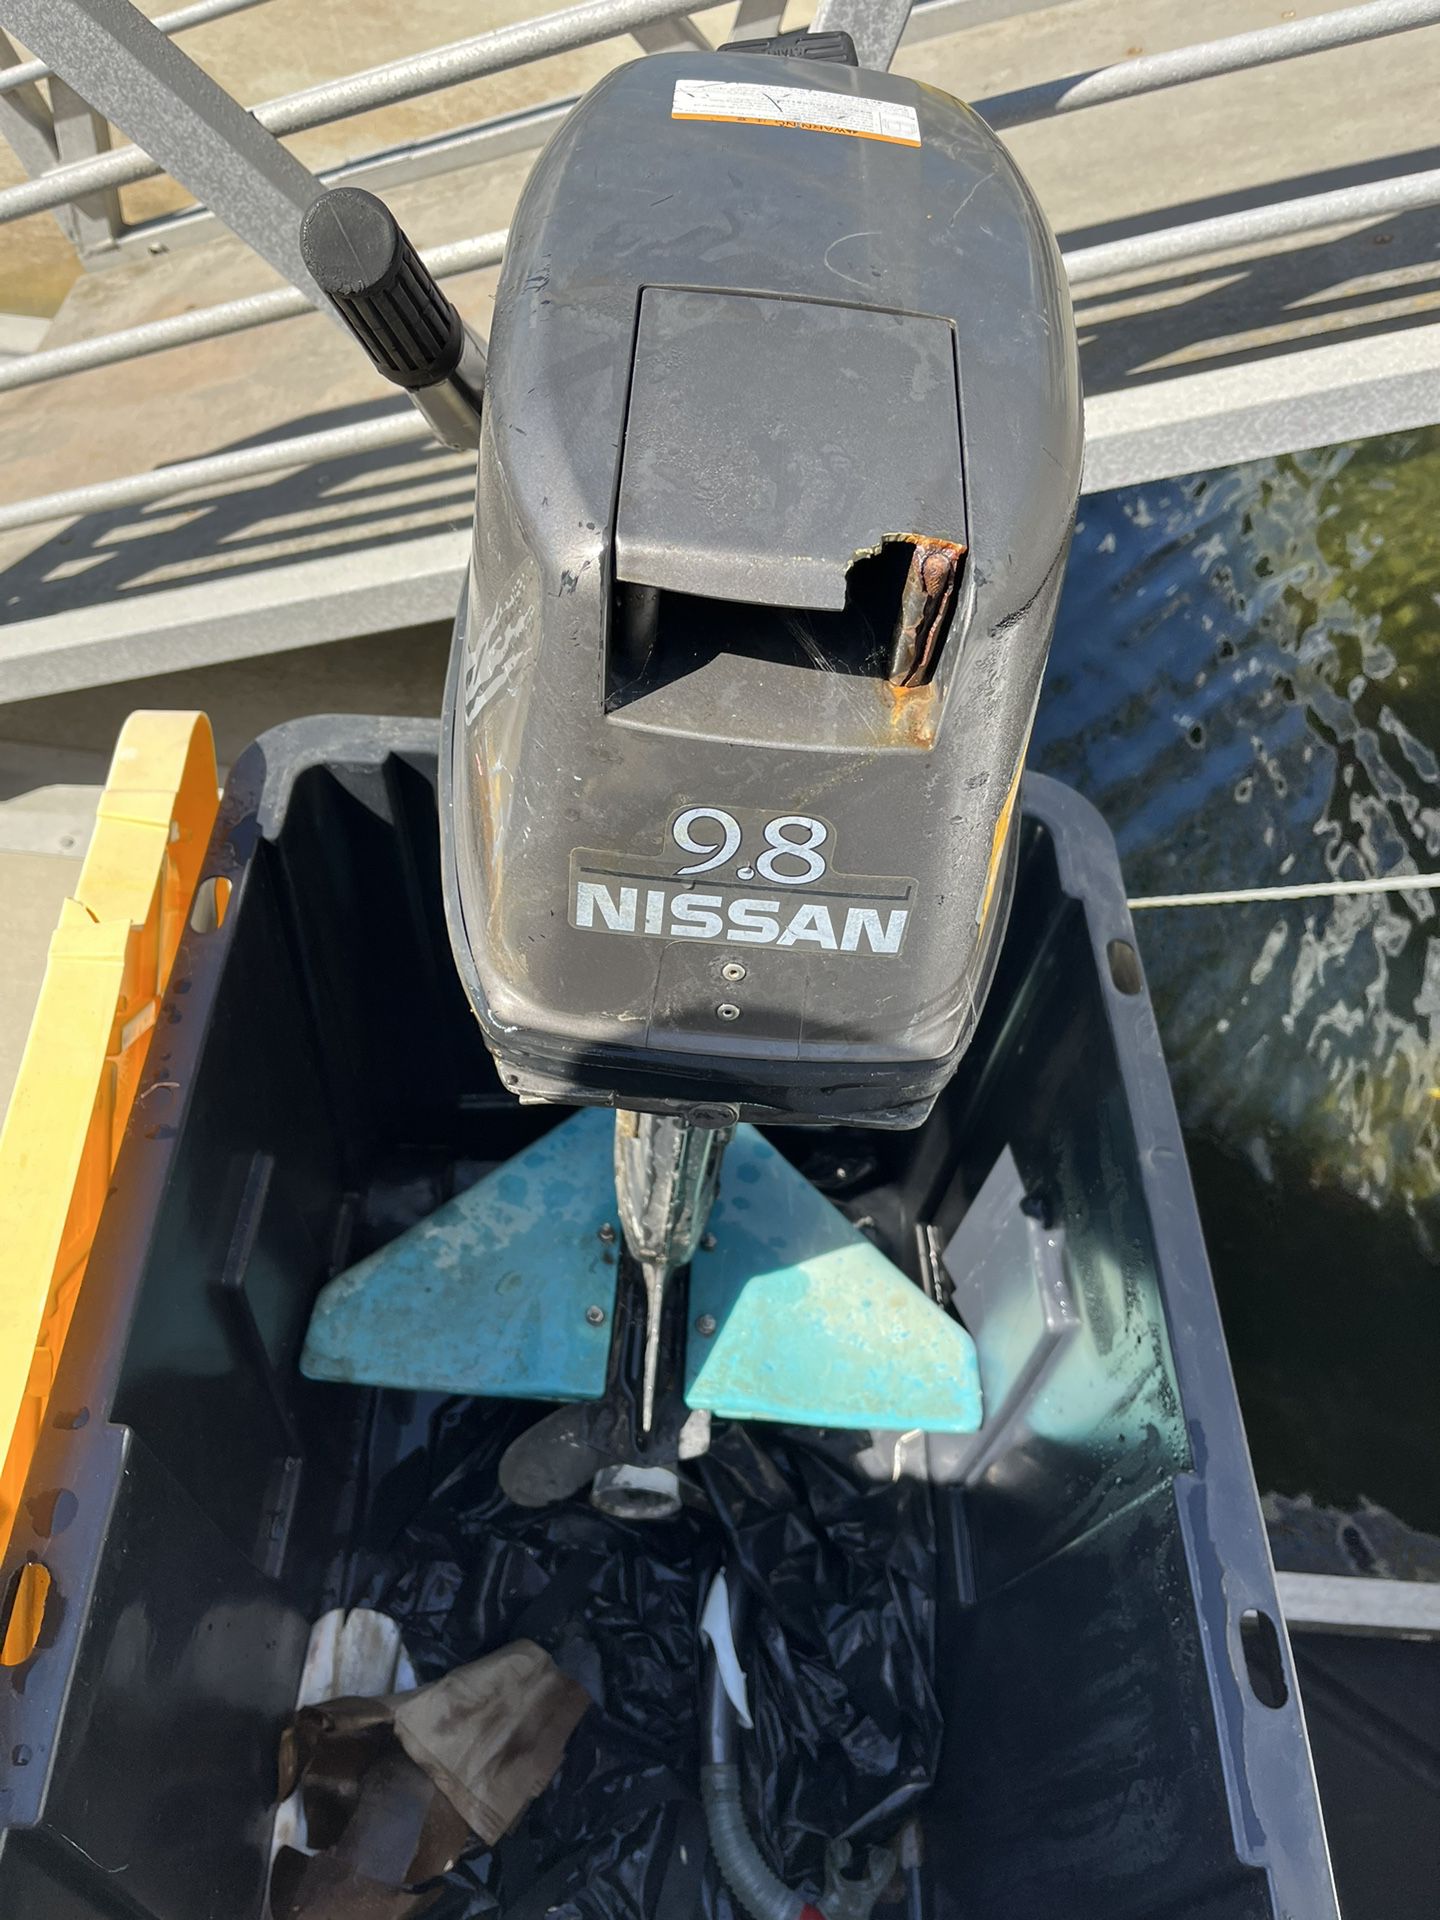 9.8 HP 2 Stroke Outboard Nissan engine (NS 9.8 b)